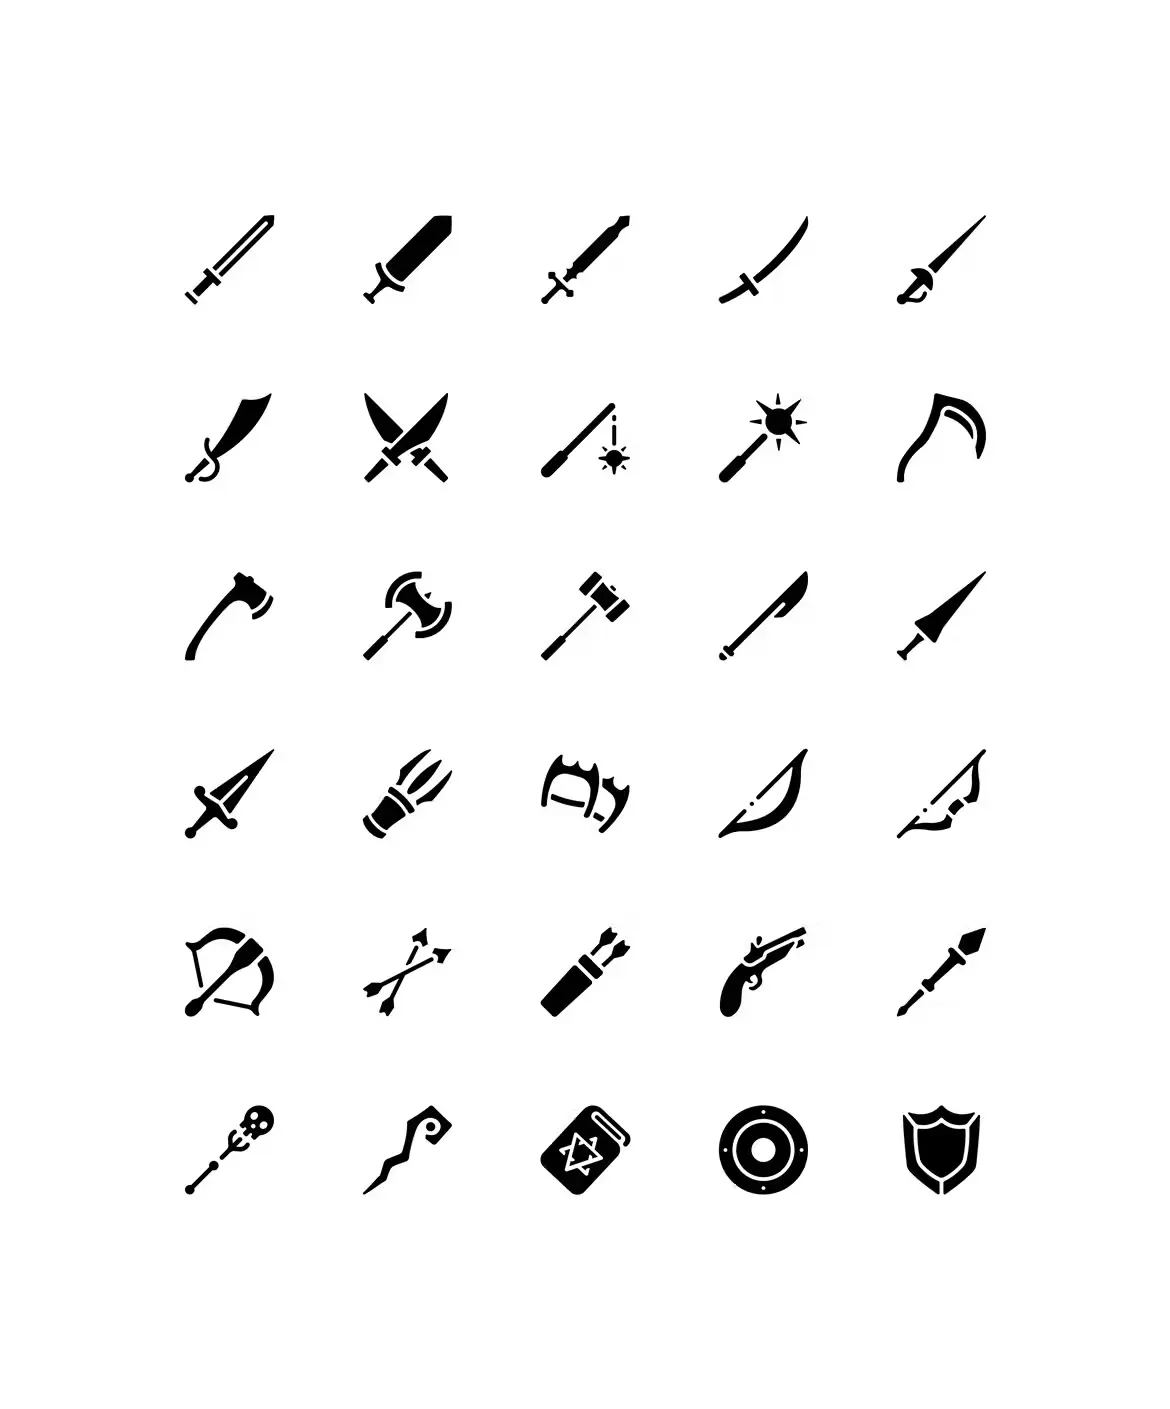 350 Role Playing Game Icons zxc